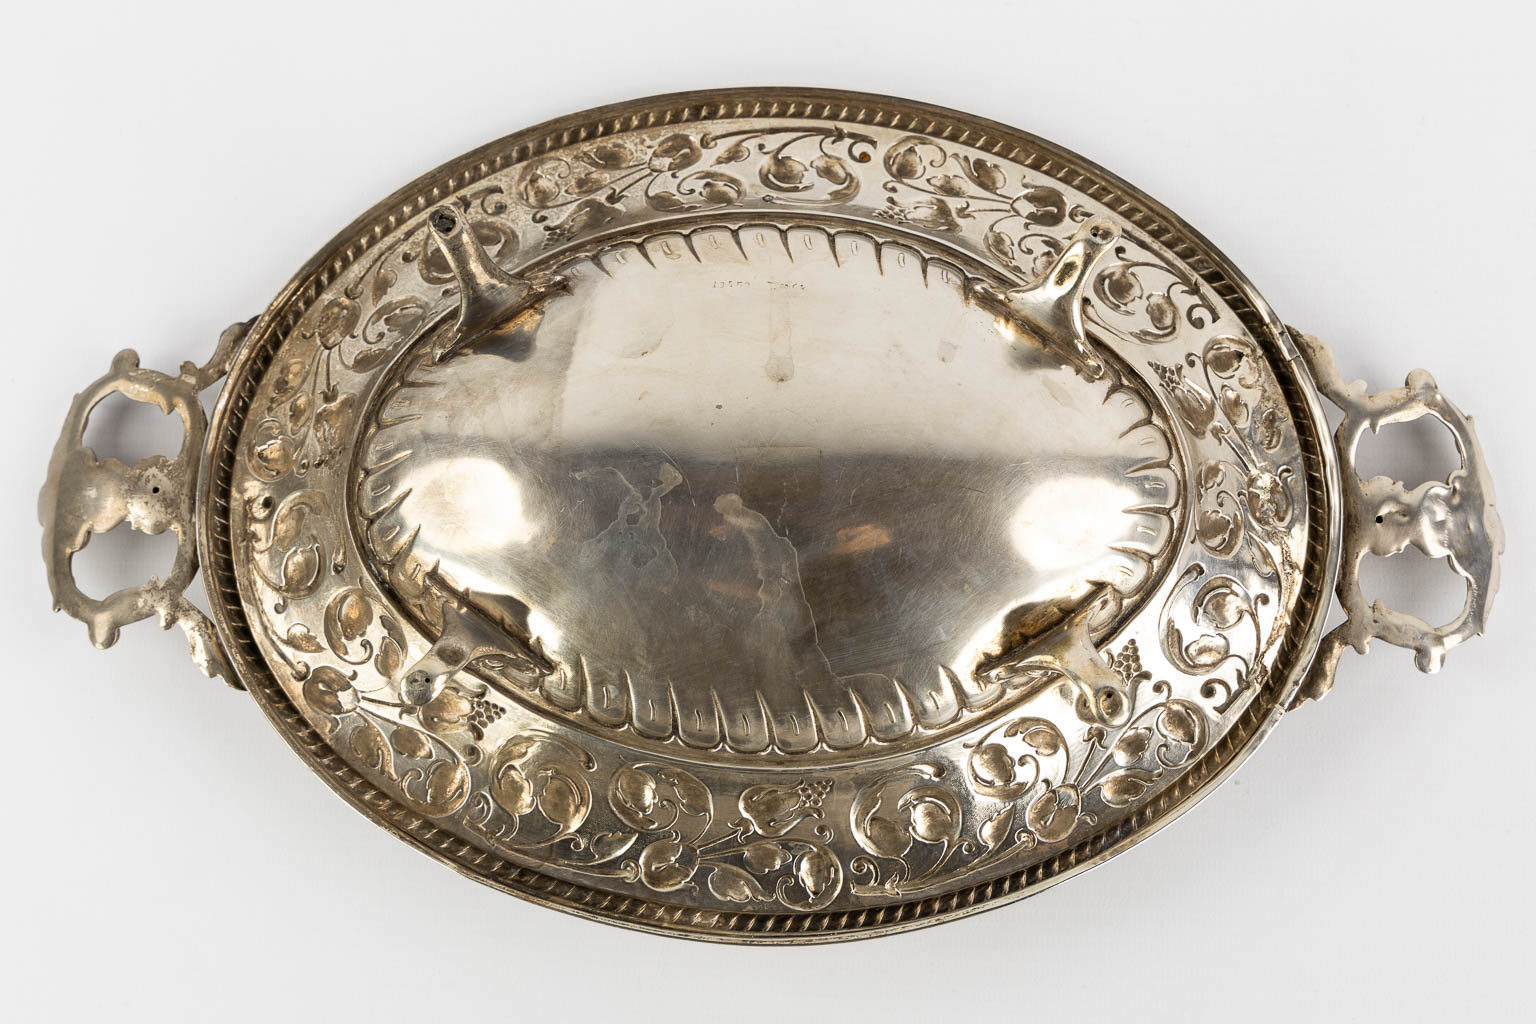 A serving bowl, silver, Germany. 800/1000. 260g. (L:21 x W:36 x H:7 cm) - Image 8 of 9